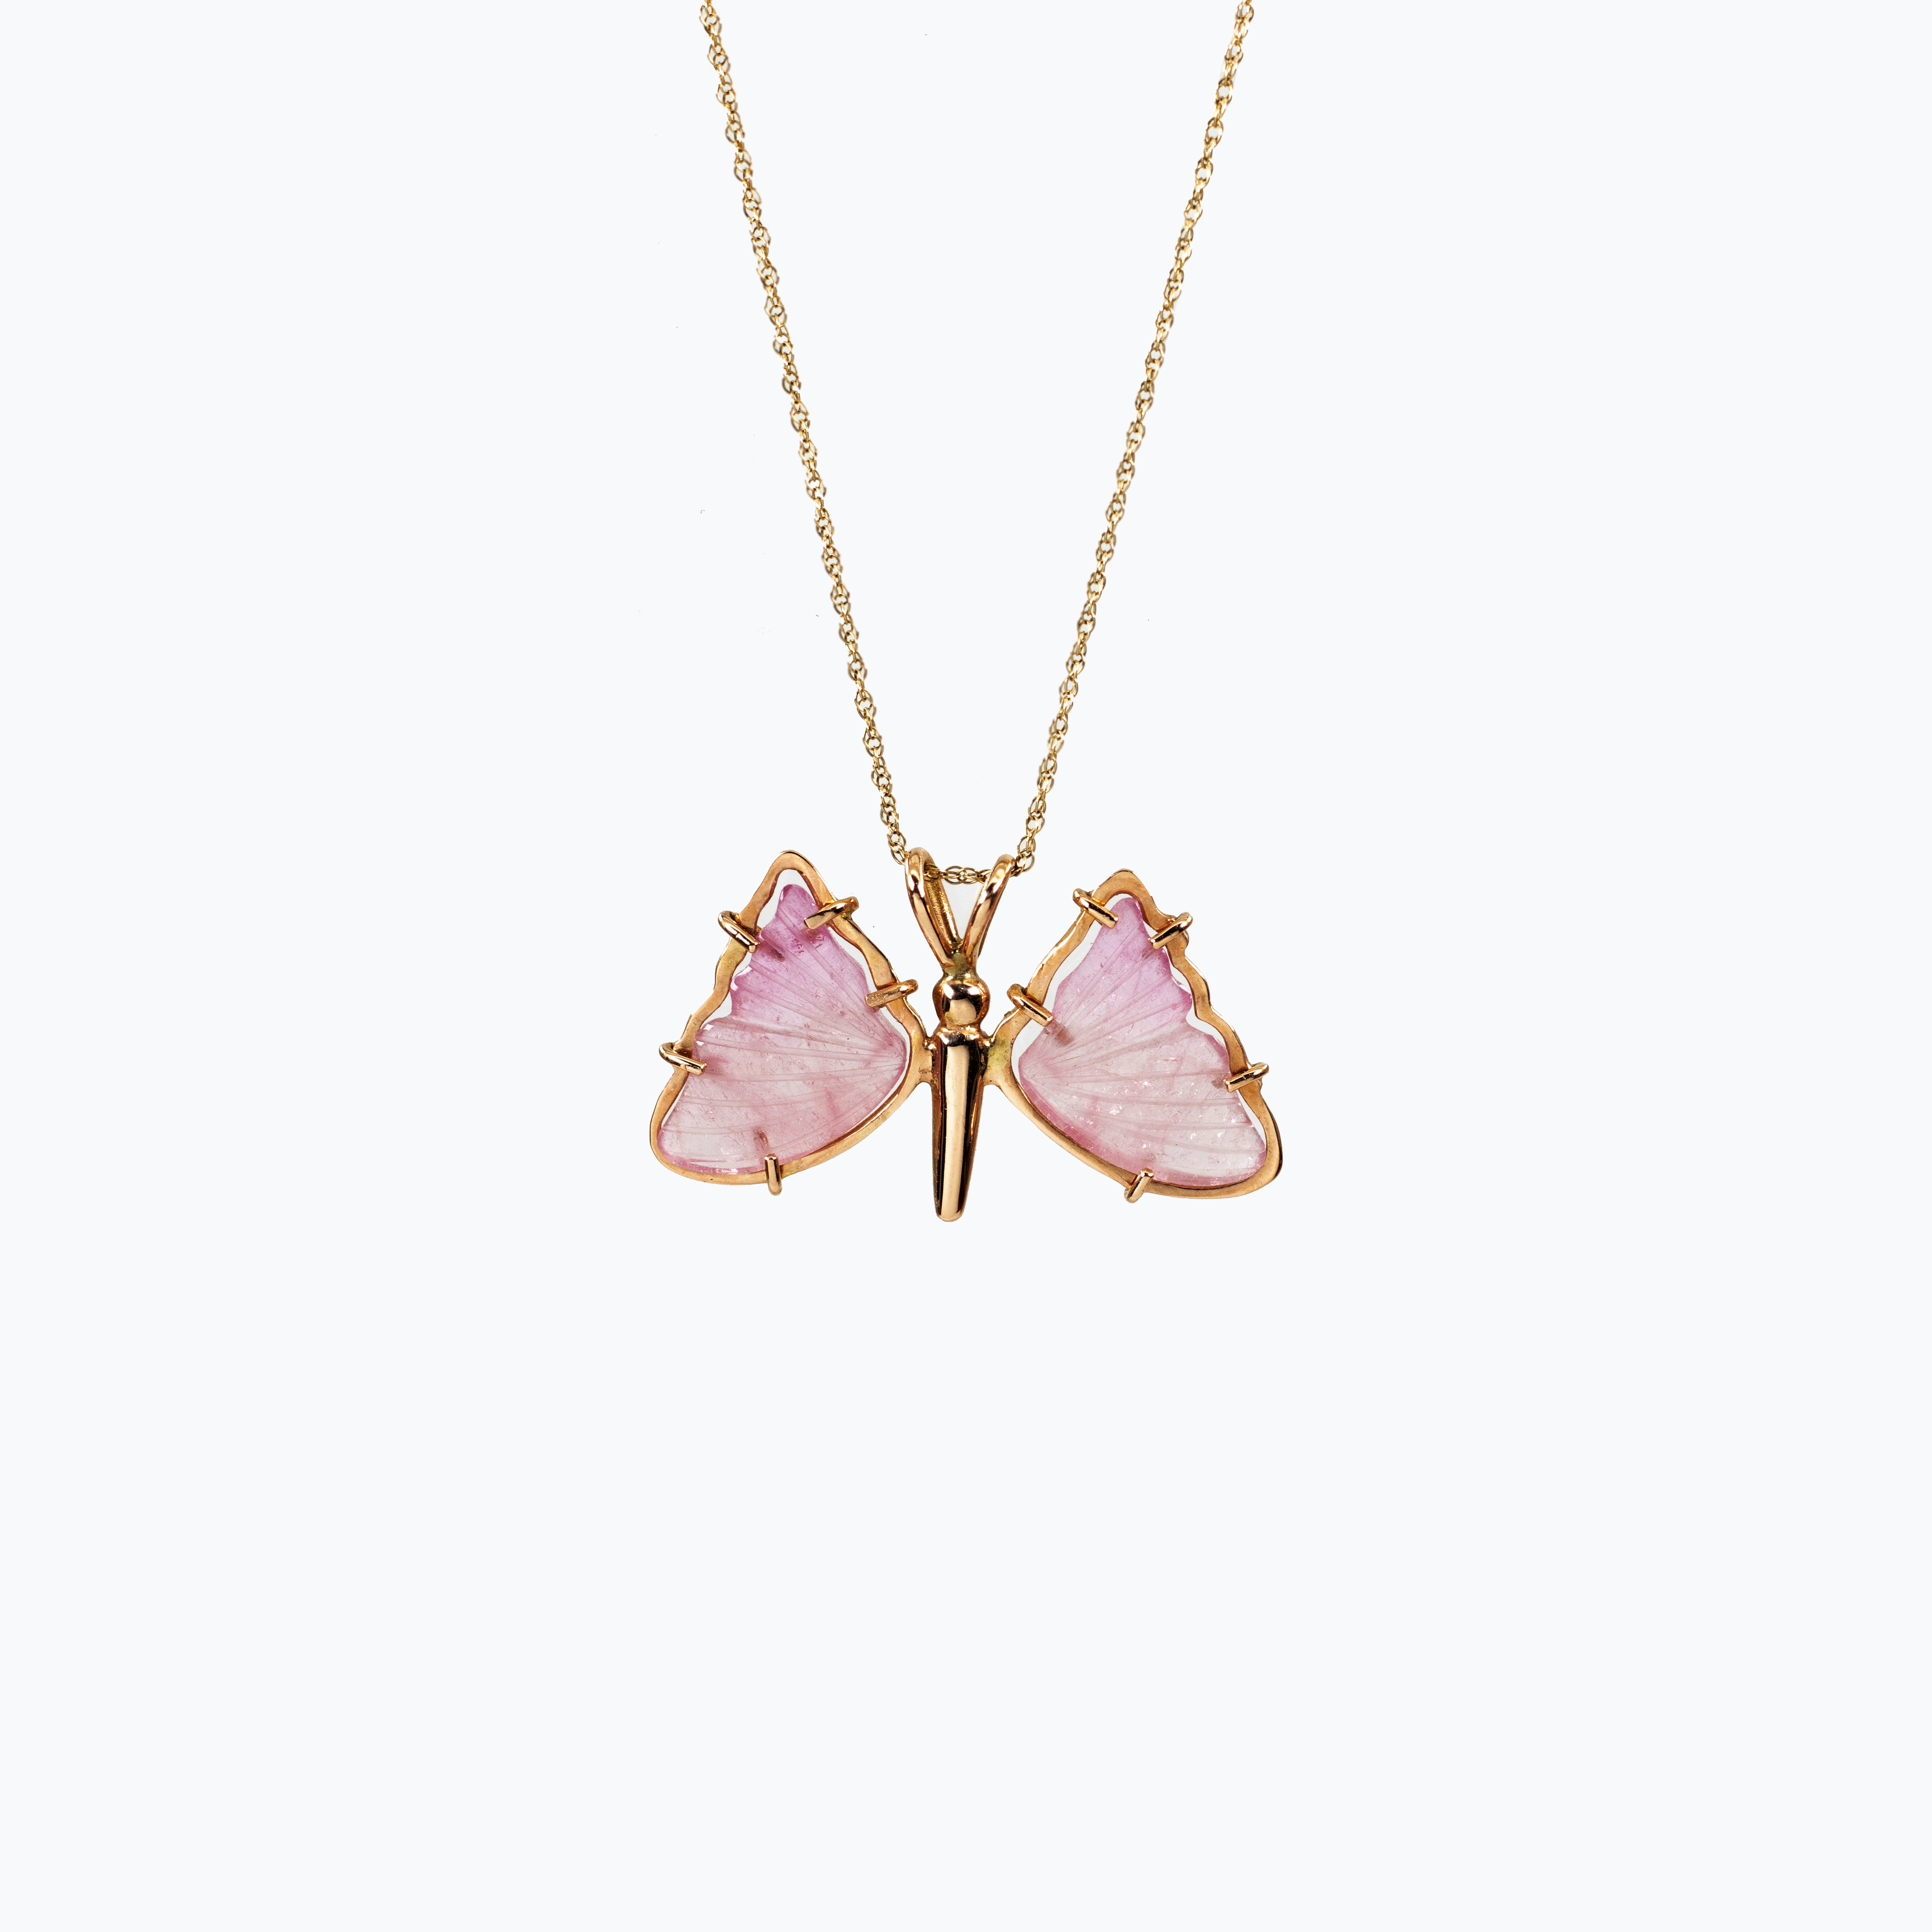 Hand-carved Pink Tourmaline Butterfly Pendant Necklace